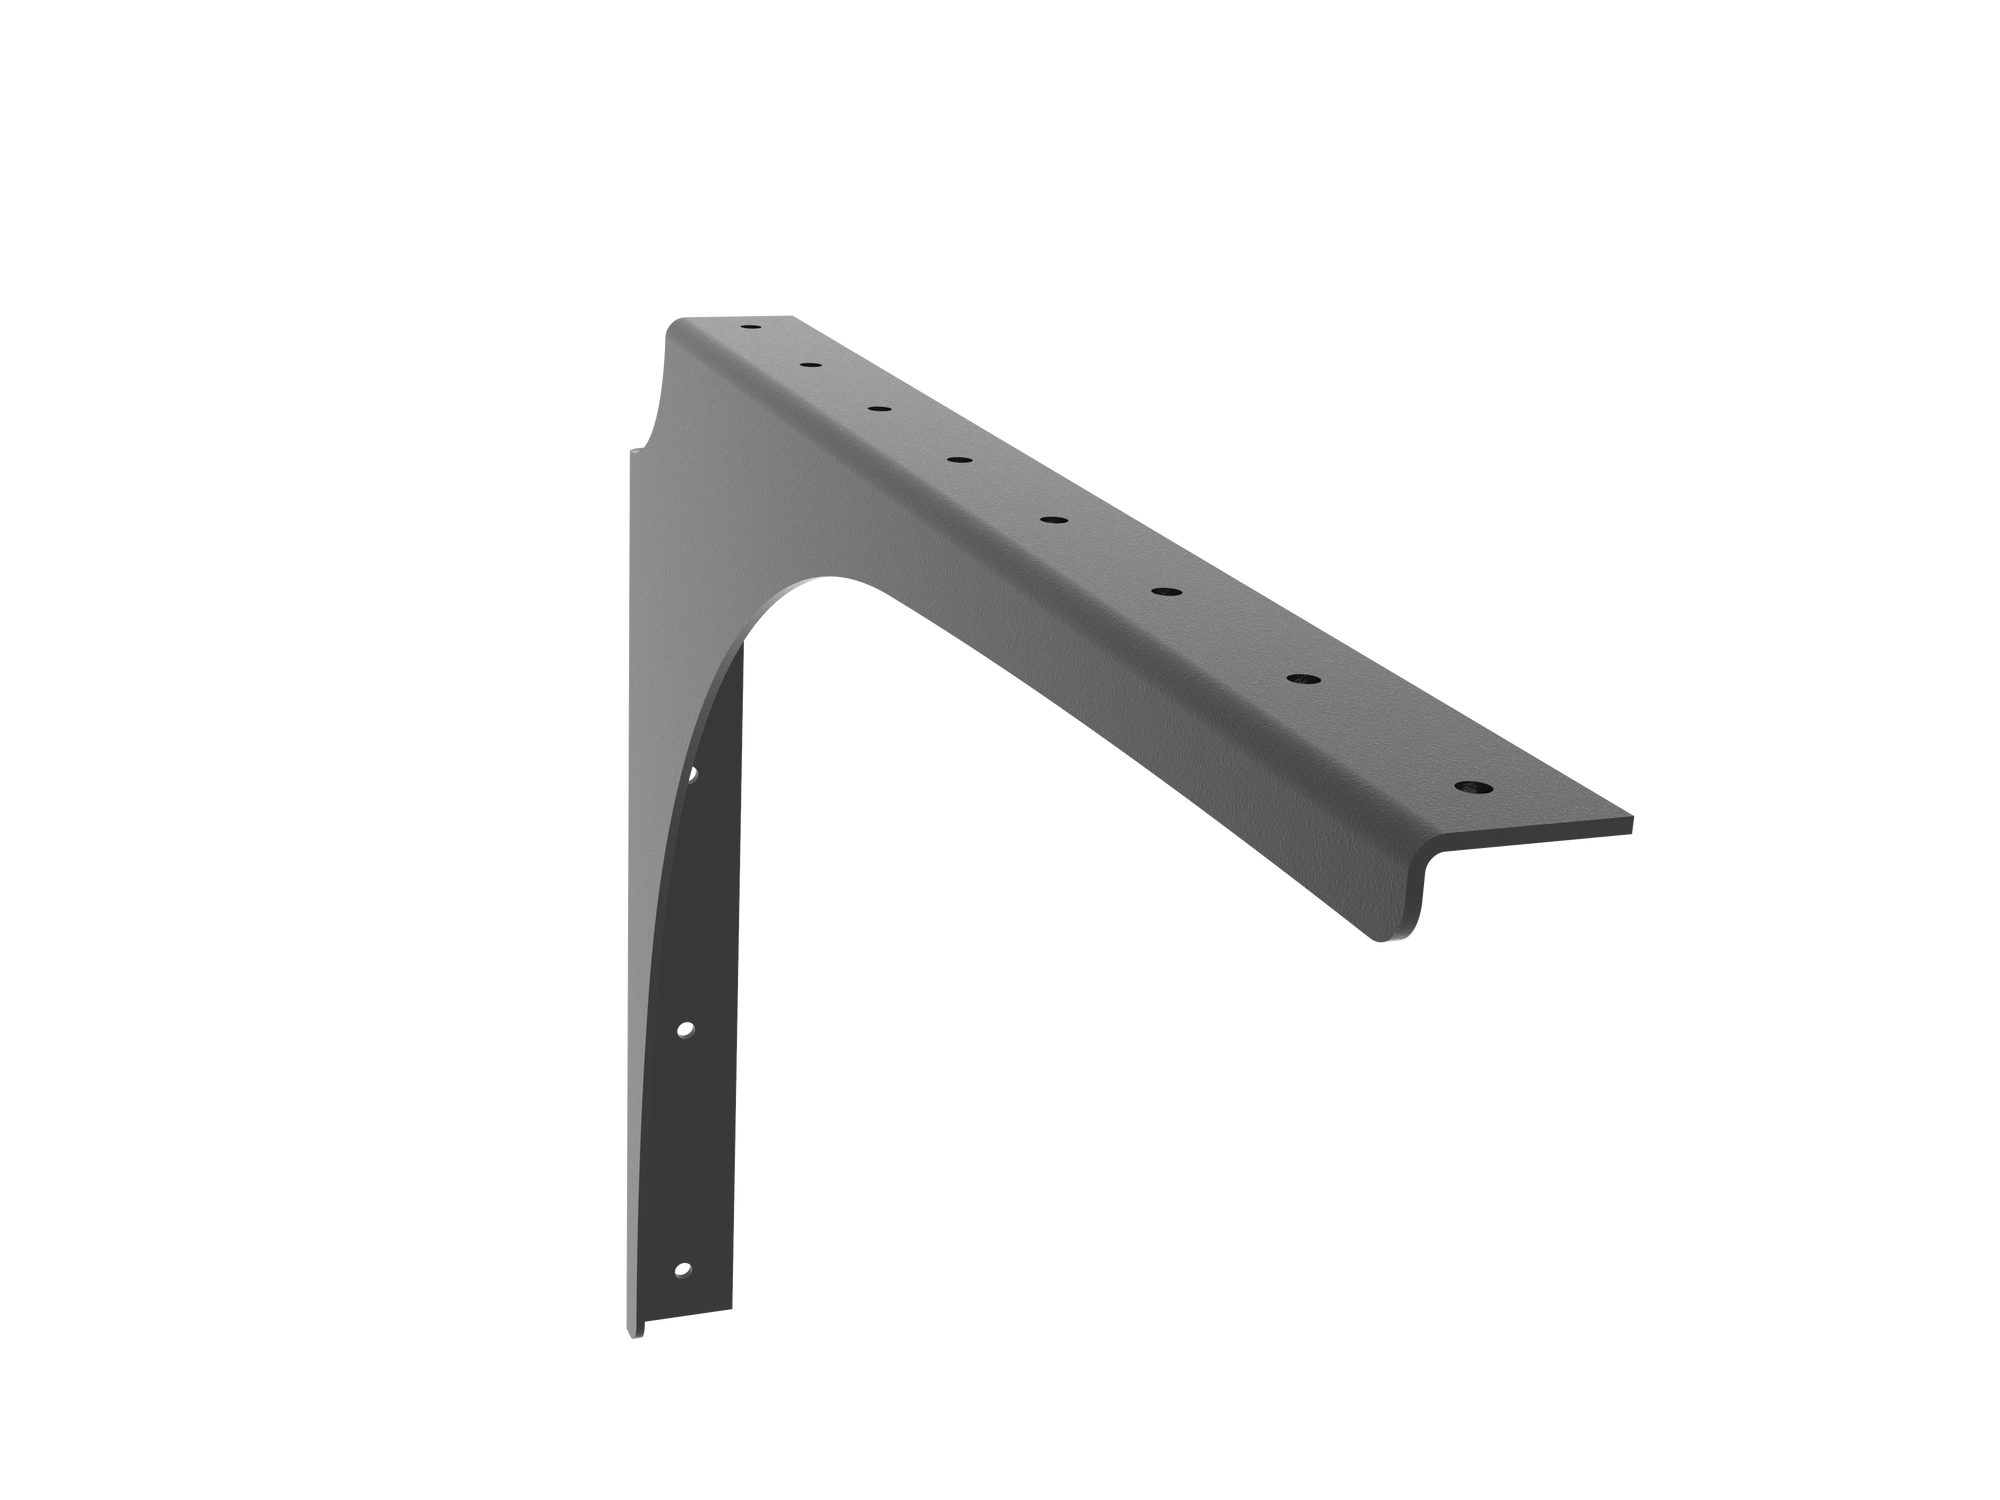 Universal Commercial Support Bracket - 21" x 15" with Black Powder Coat Finish. Supports floating ADA-compliant vanities, desks, shelving, countertops, and more.